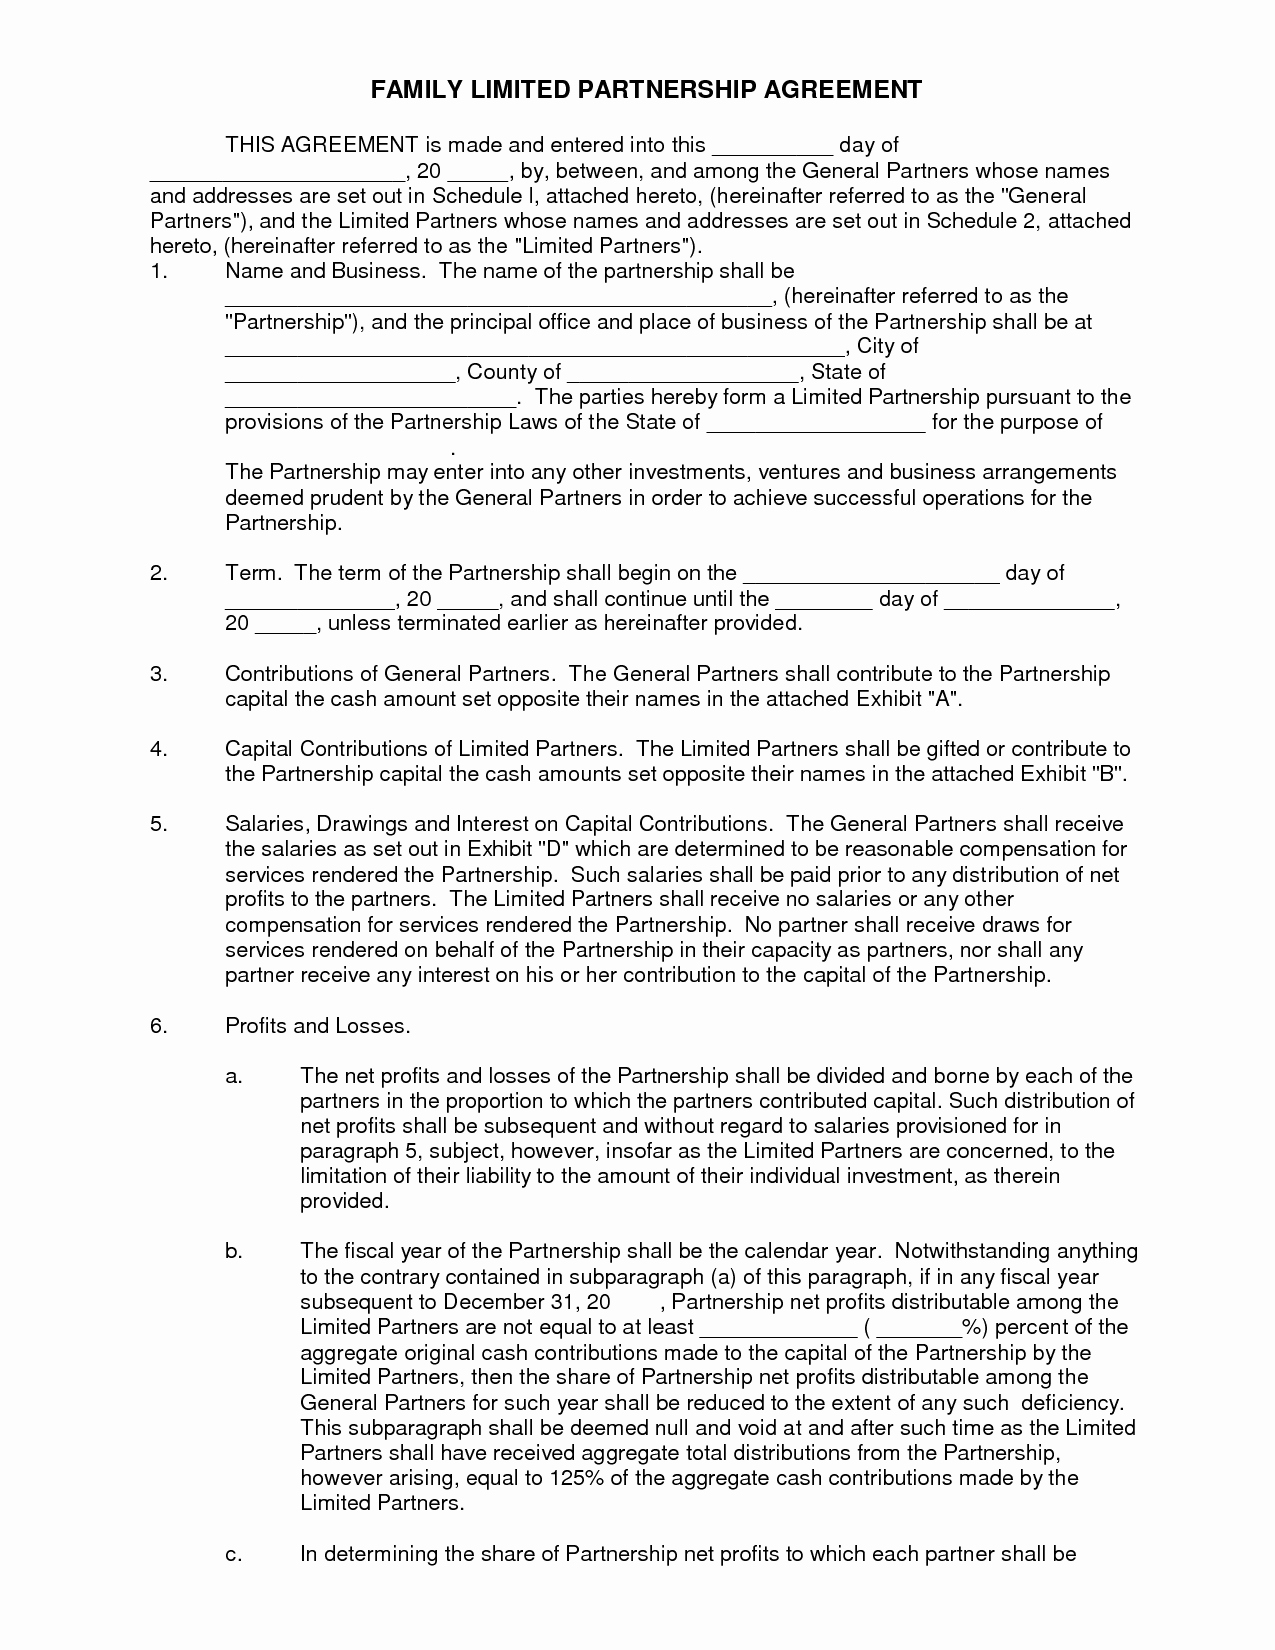 Limited Partnership Agreement Template Awesome 10 Best Of Family Partnership Agreement Templates